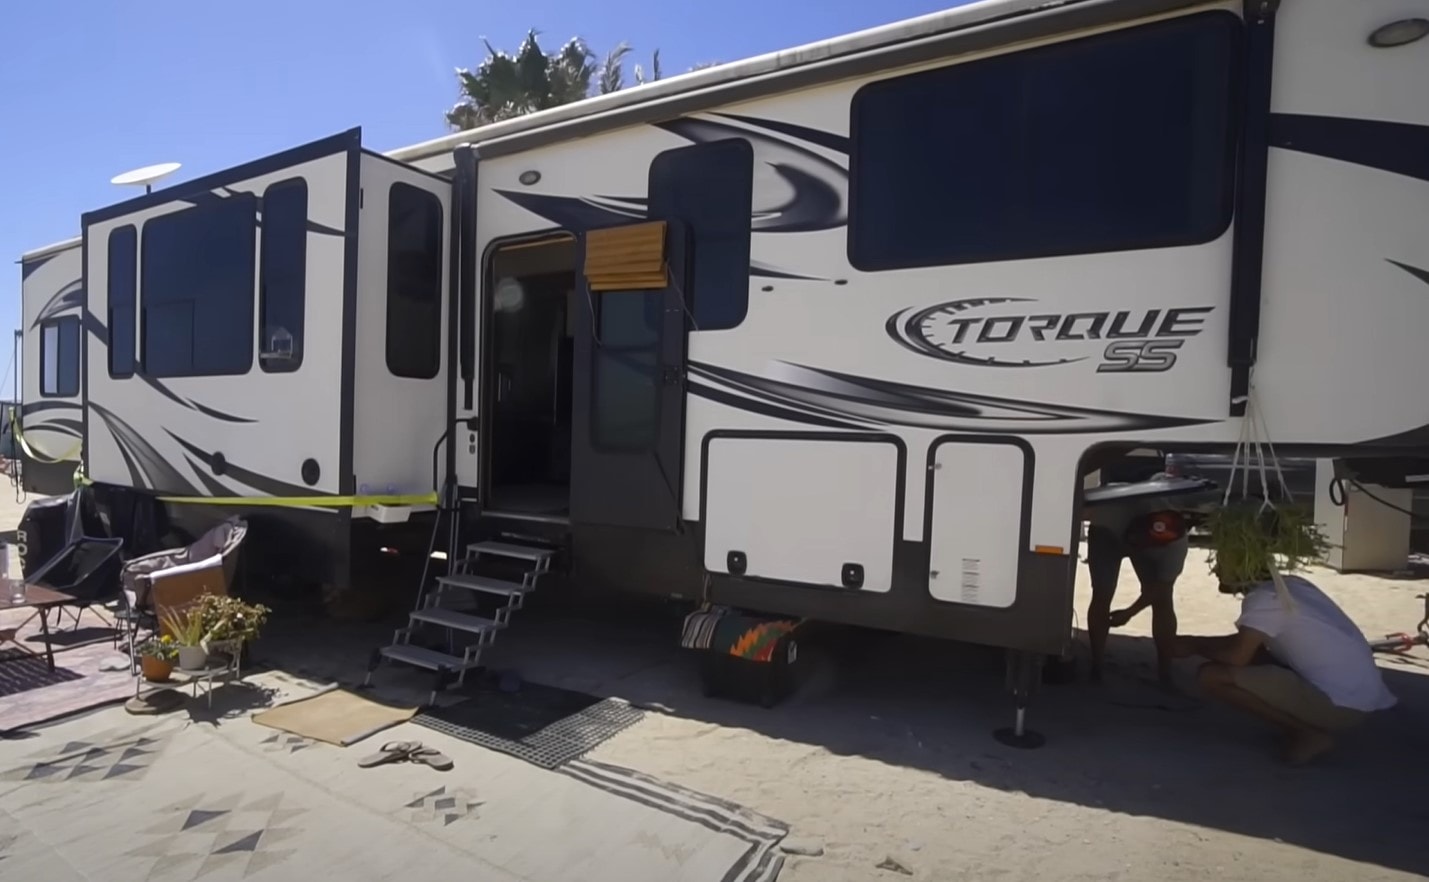 This Toy Hauler Rv Was Turned Into A